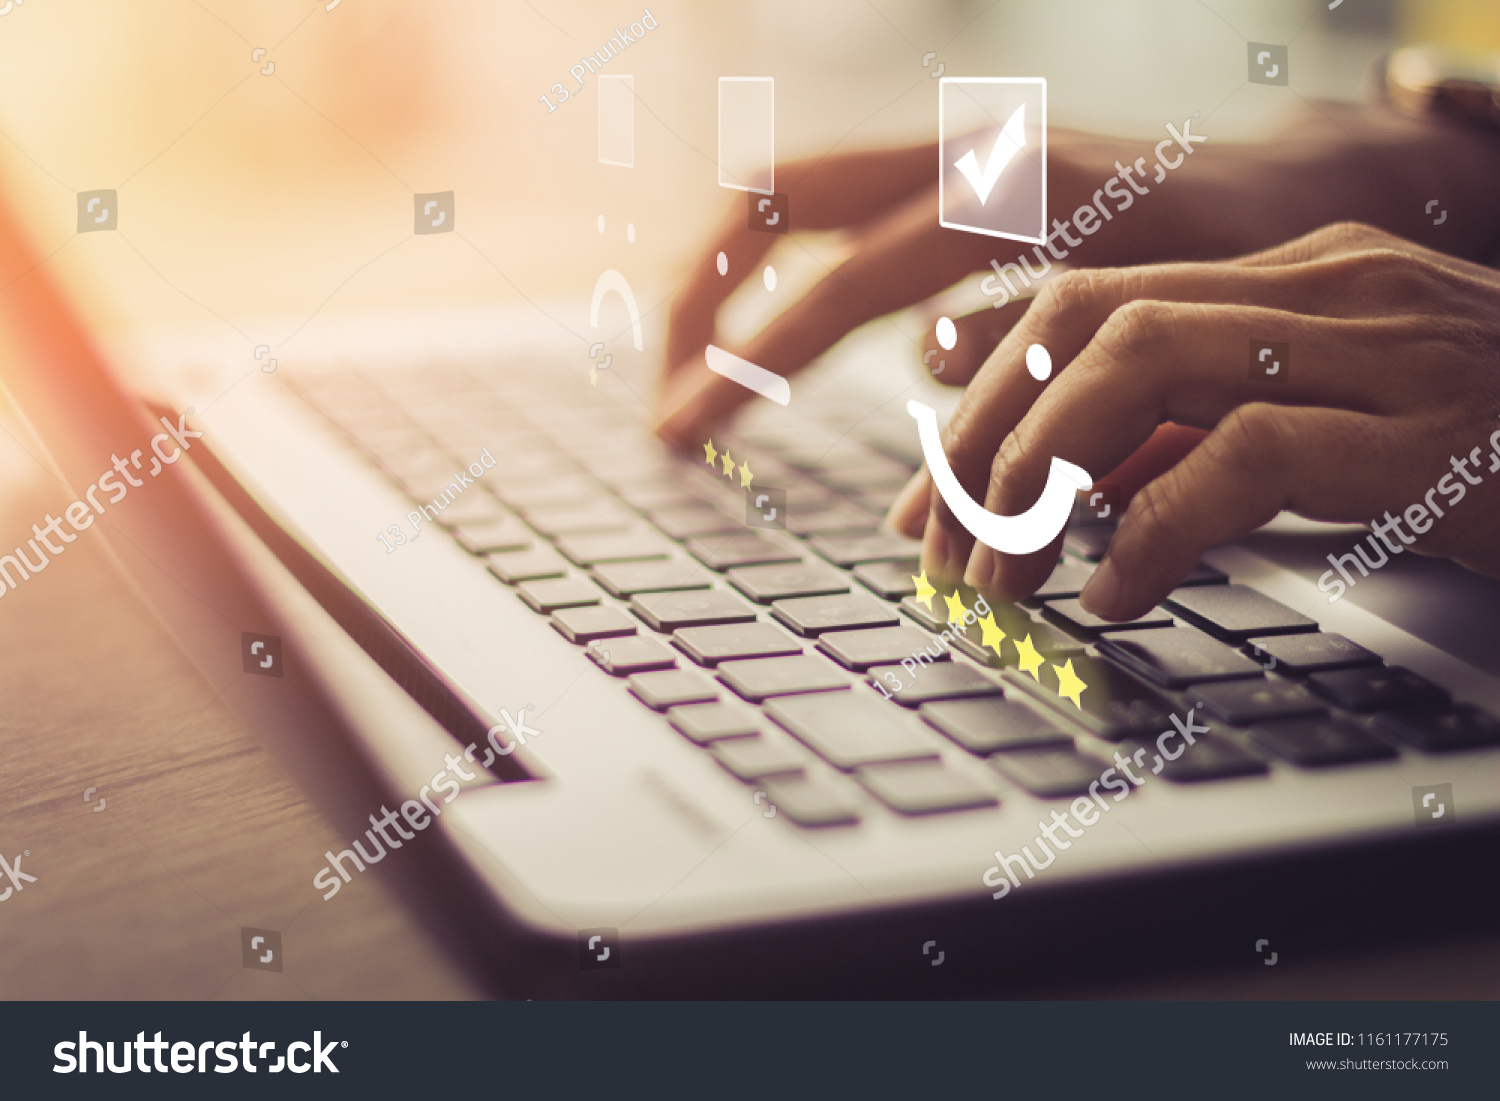 Businesswoman pressing face emoticon on the keyboard laptop / Customer service evaluation concept.
 #1161177175